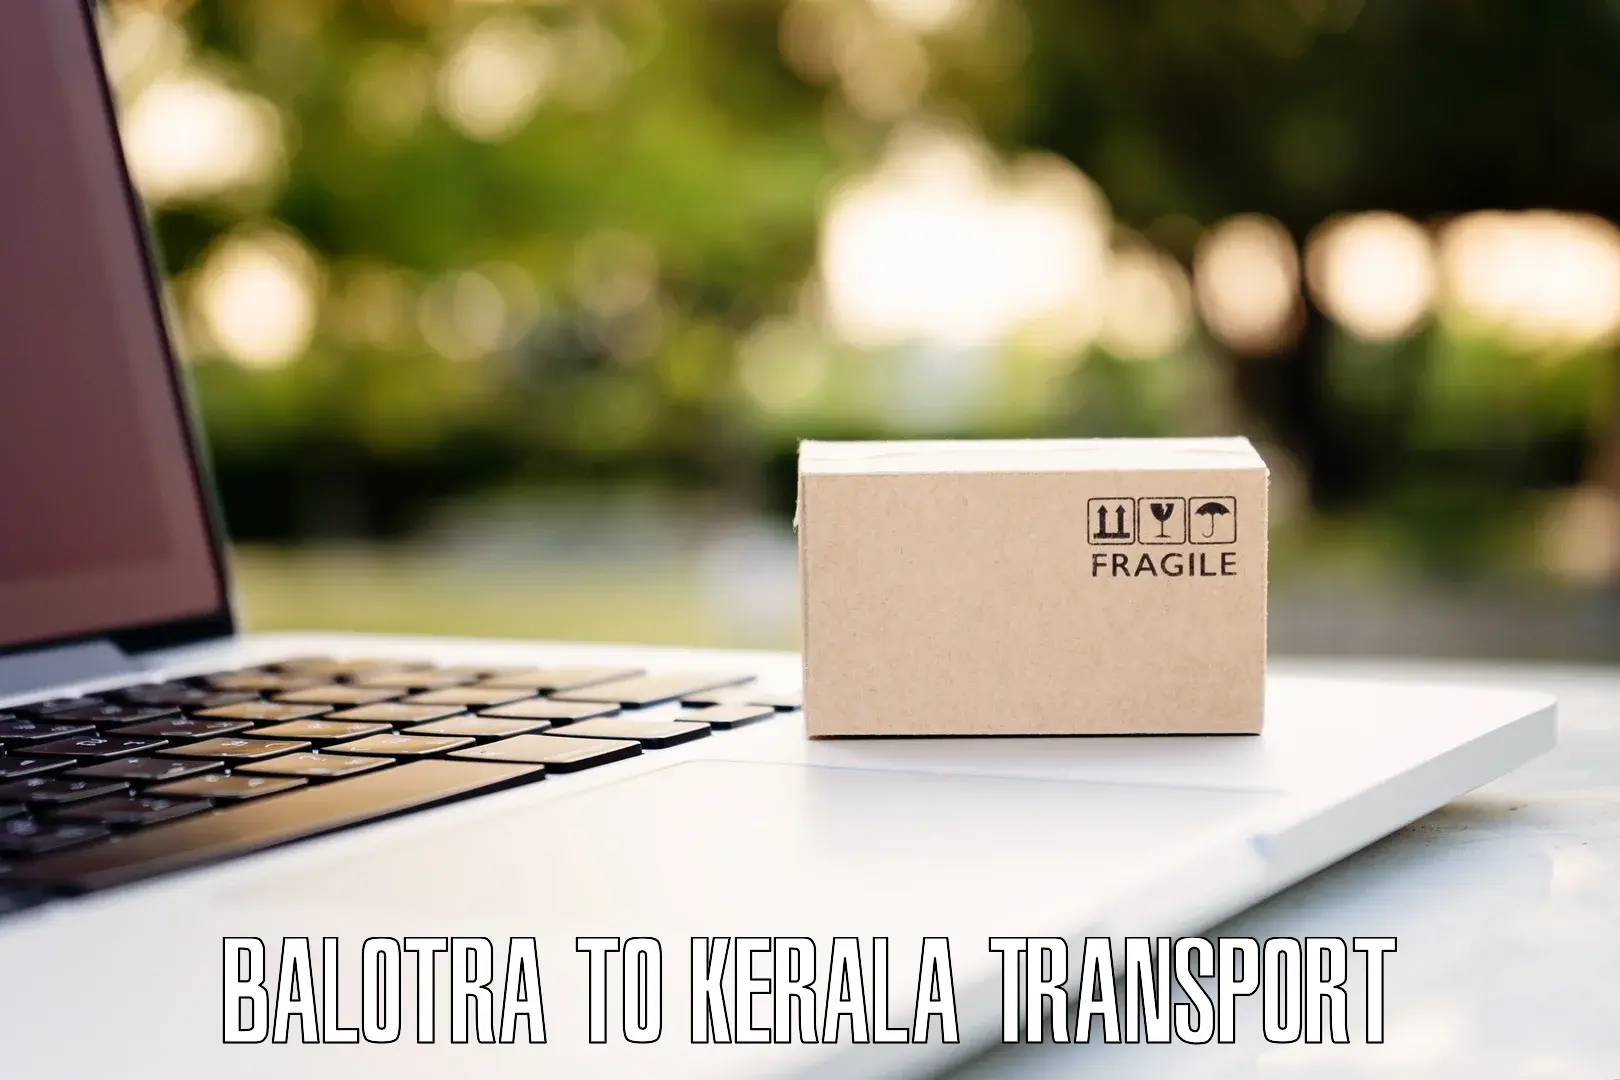 Commercial transport service Balotra to Kerala